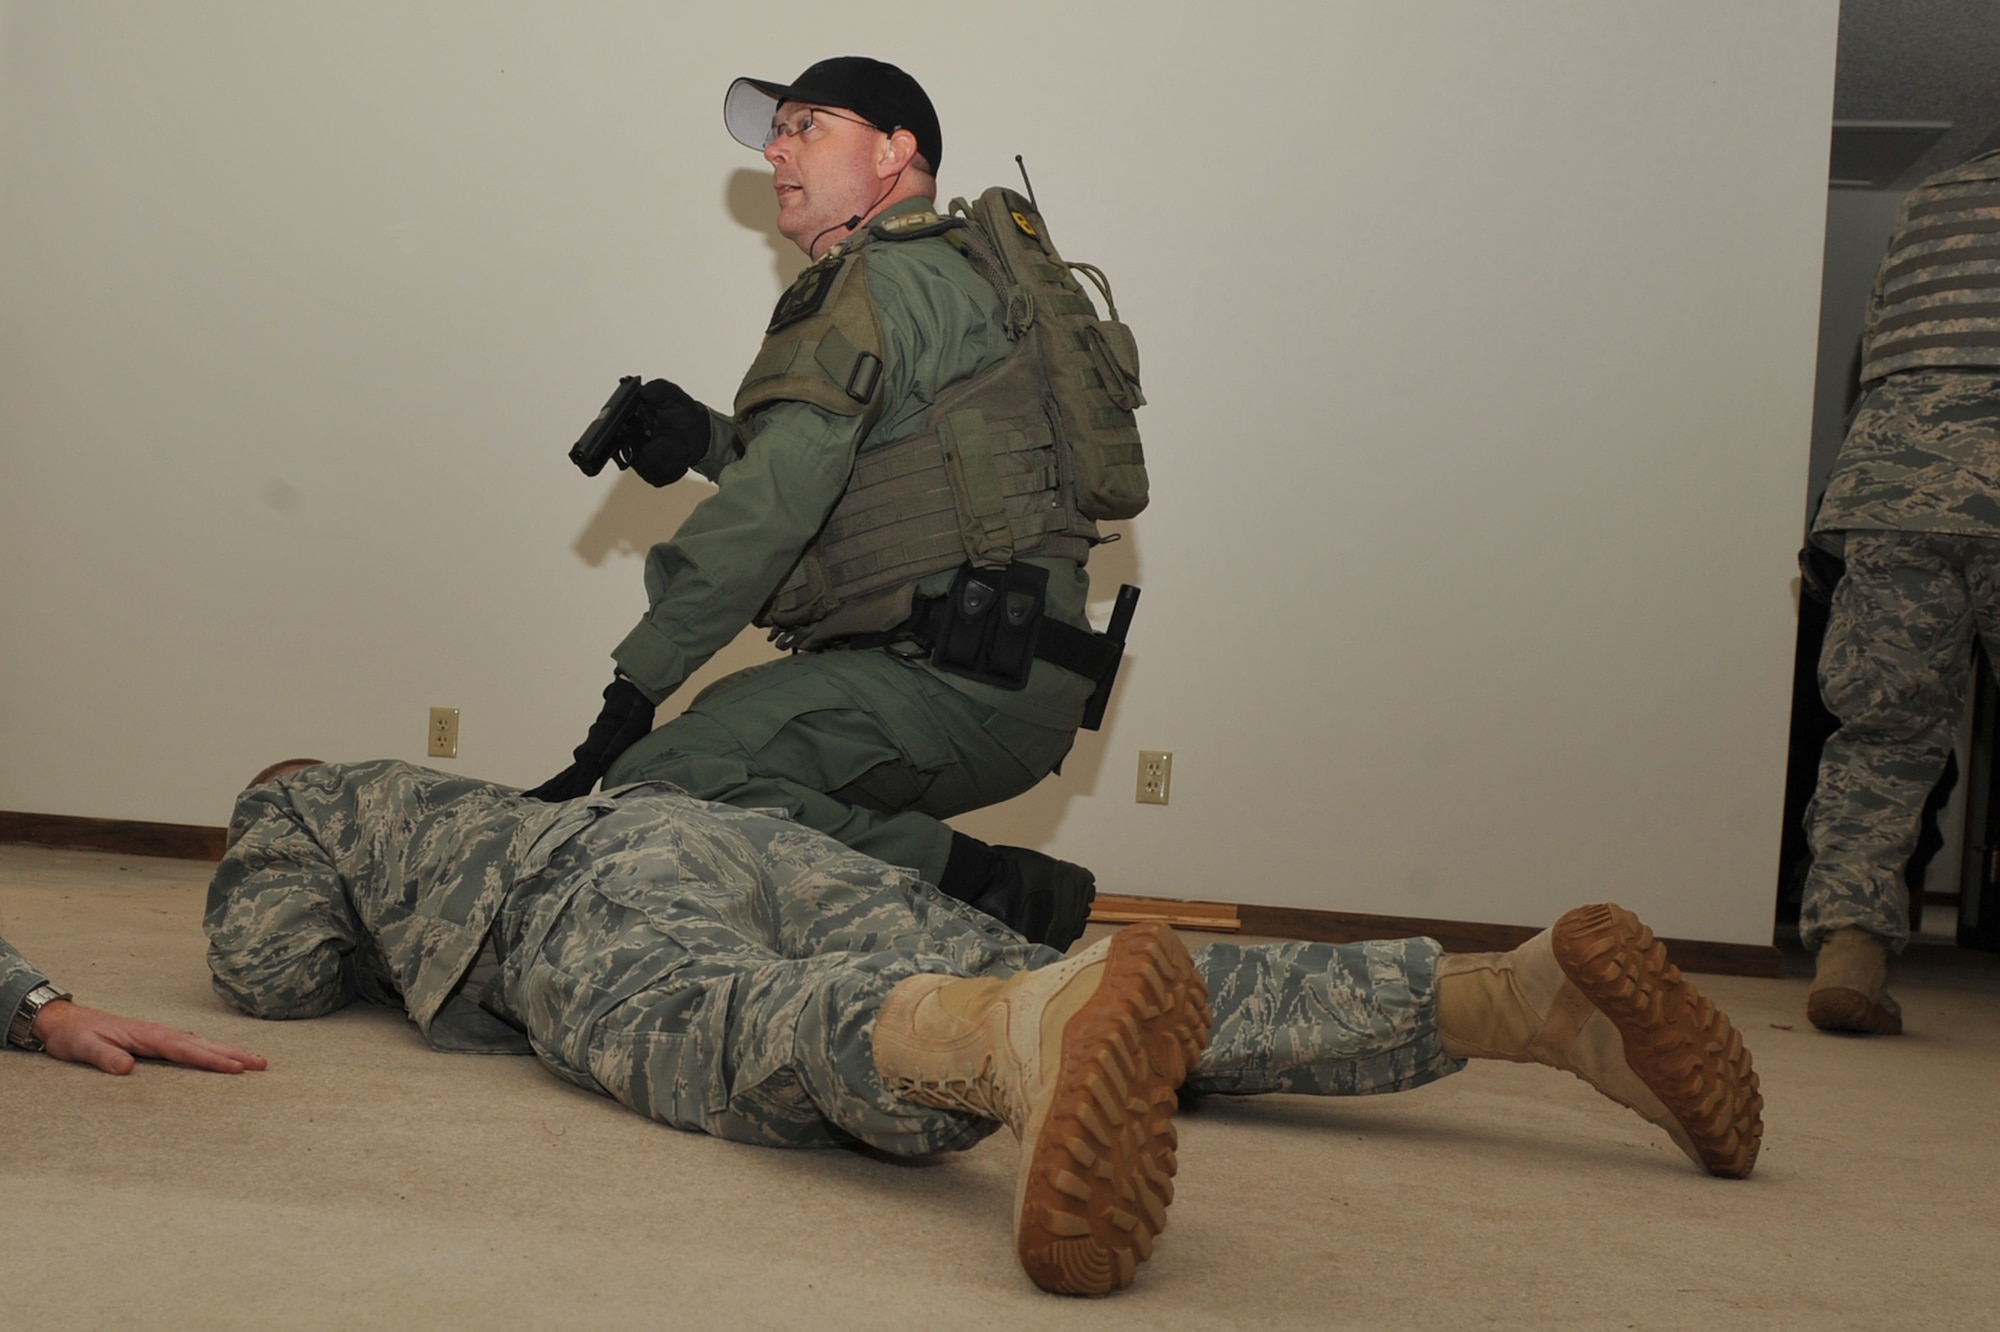 SEYMOUR JOHNSON AIR FORCE BASE, N.C.-- A Duplin County Sheriff's Office special response team member pins down Staff Sgt. Tommy Dailey while searching a room during a training exercise here, April 5, 2011. Sergeant Dailey is playing the role of an assailant to ensure the first responders know how to properly secure aggressors. Sergeant Dailey is a 4th Security Forces Squadron Combat Arms Training and Maintenance instructor and is from Desoto, Ill. (U.S. Air Force photo/Senior Airman Whitney Lambert) (RELEASED)